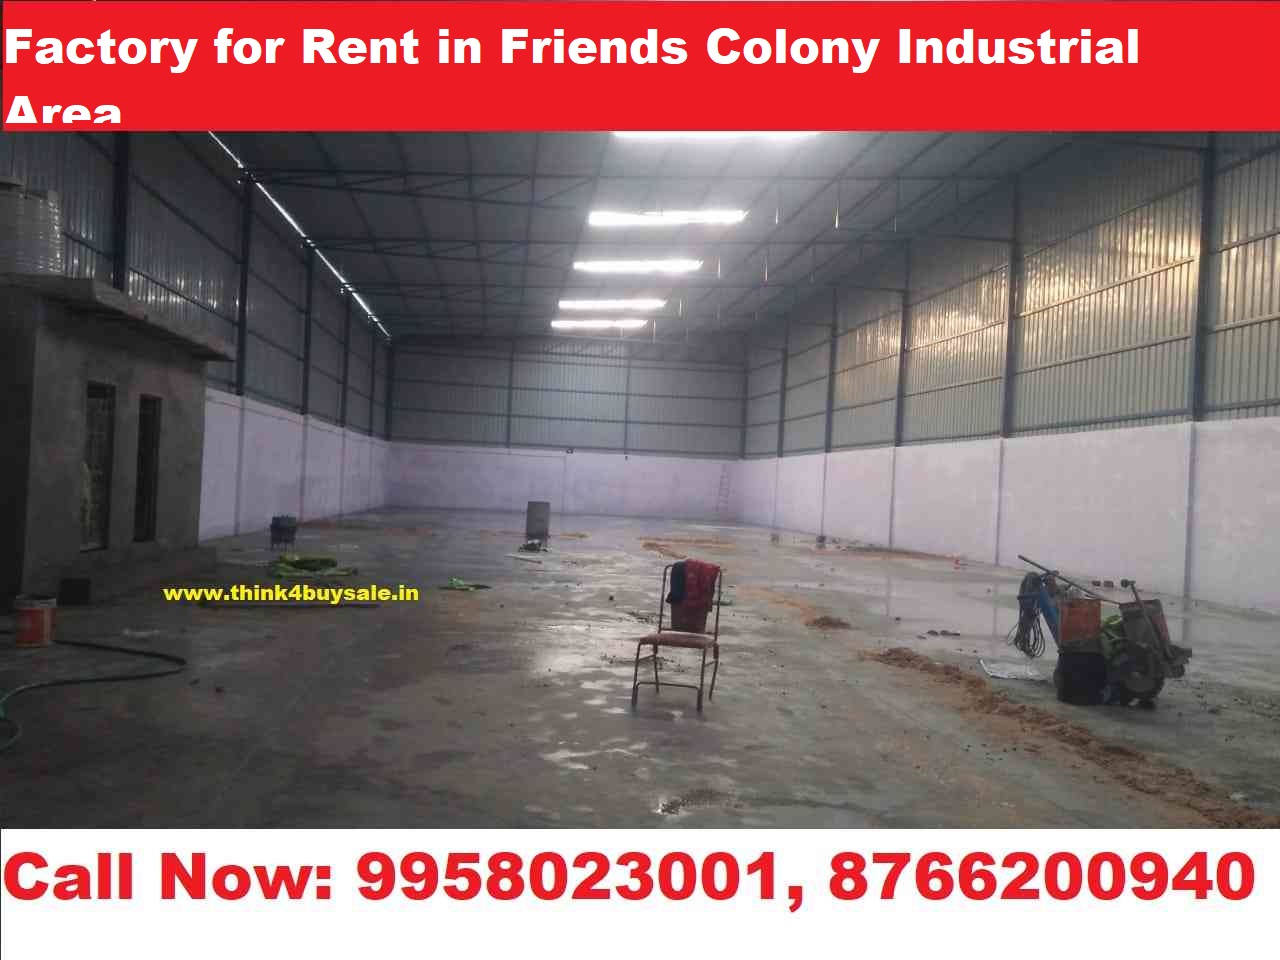 Factory for Rent in Friends Colony Industrial Area